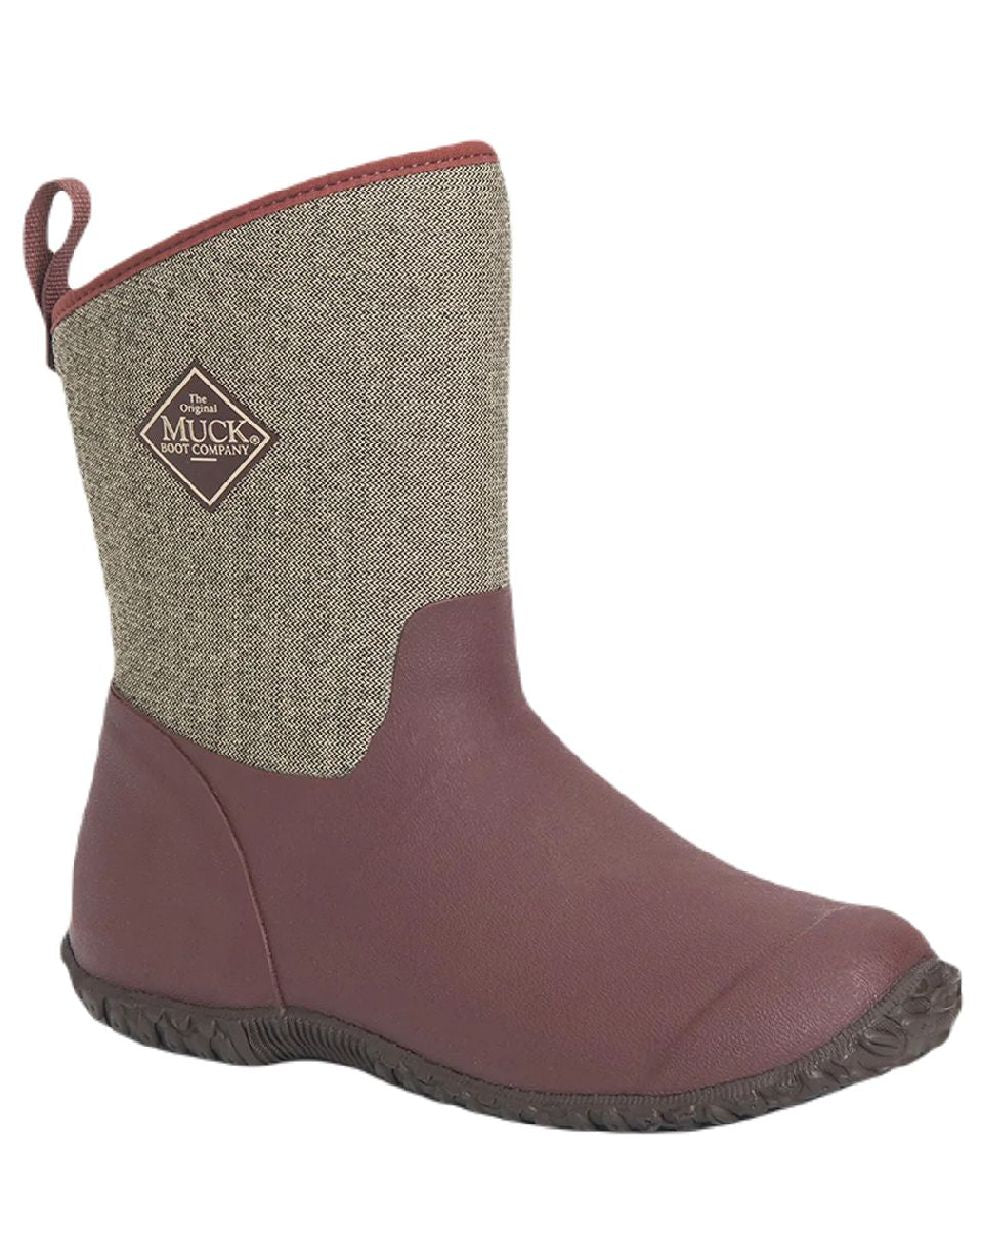 Raisin Coloured Muck Boots Womens Muckster II Mid Wellingtons On A White Background 